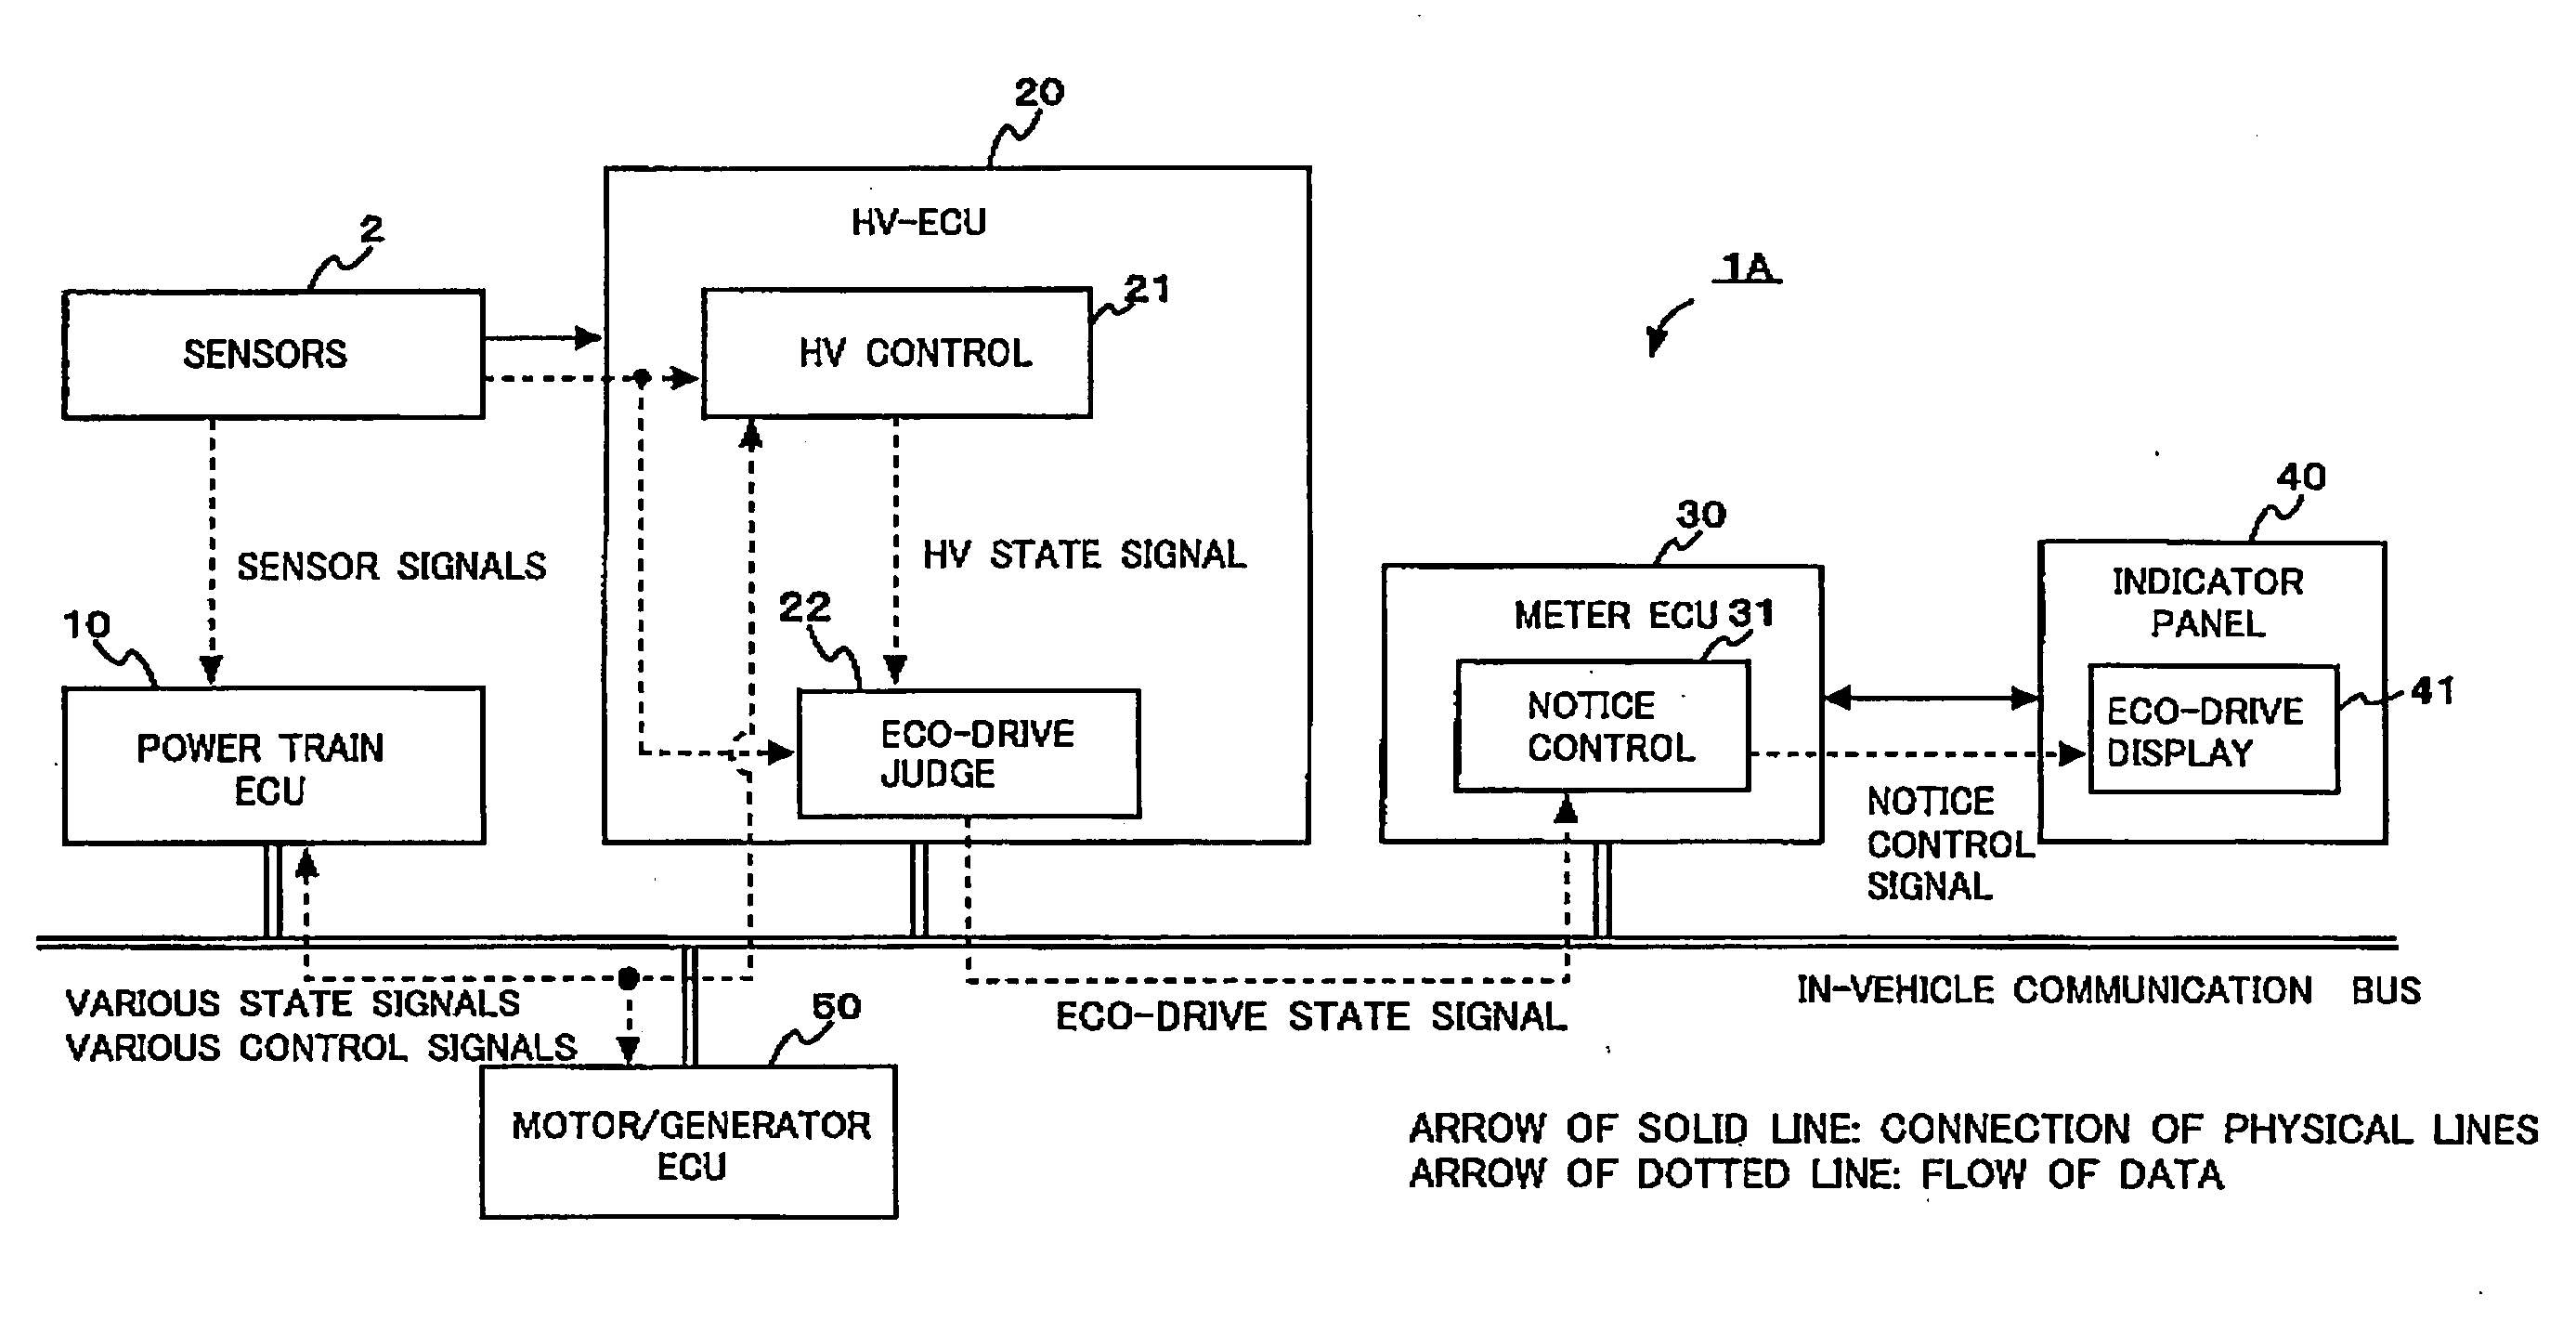 Eco-drive assist apparatus and method